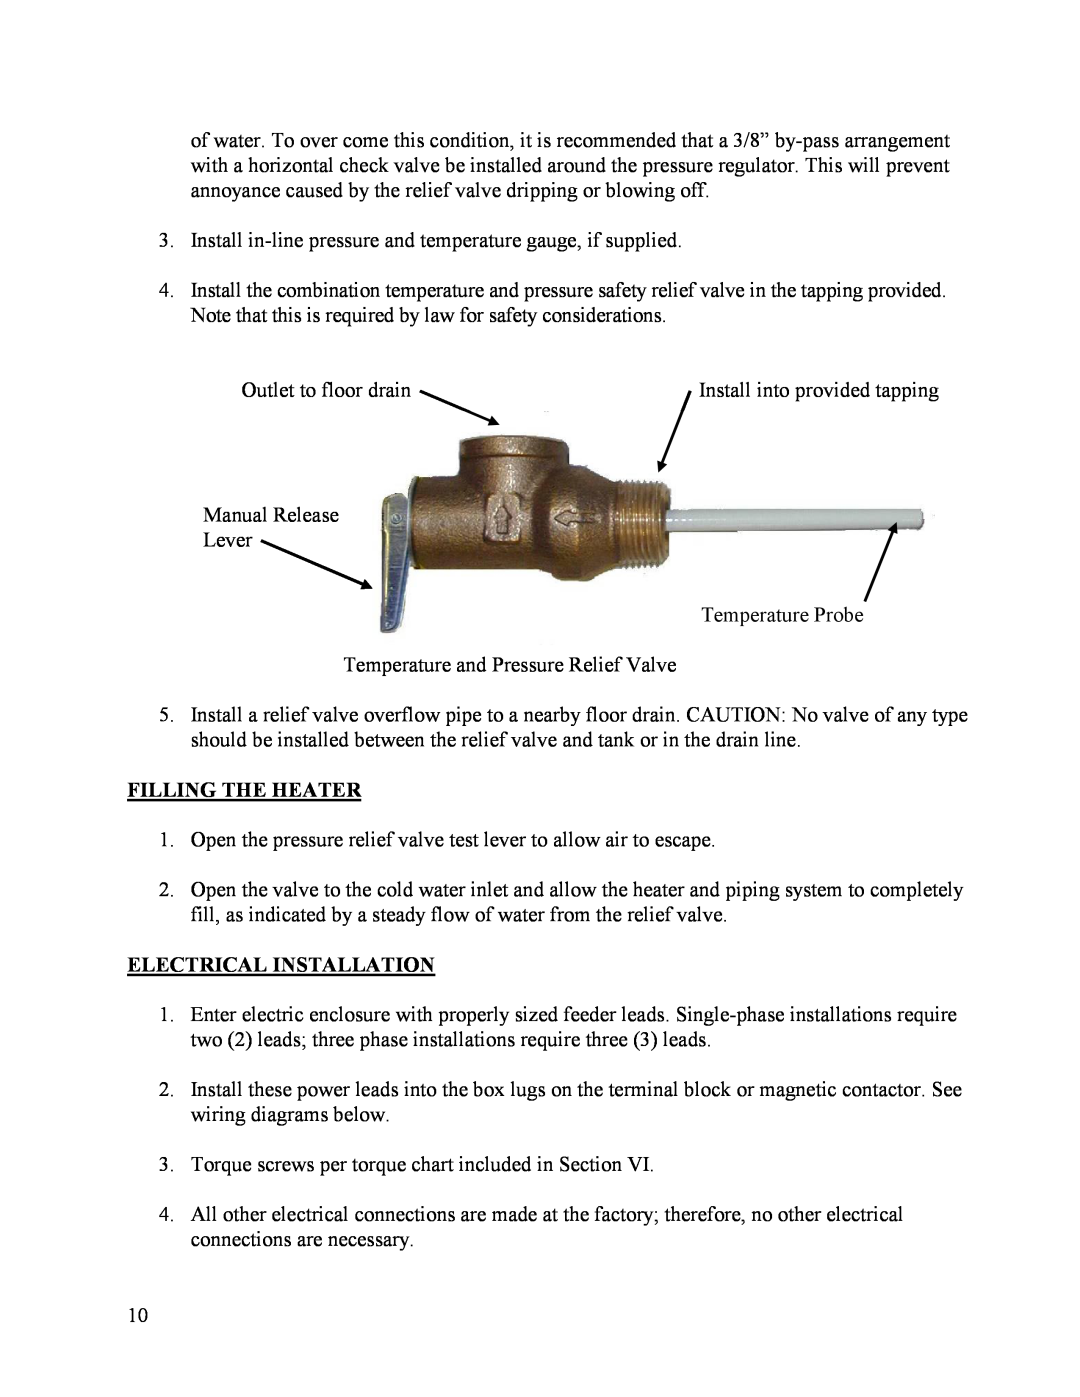 Hubbell Electric Heater Company B manual Filling The Heater, Electrical Installation 